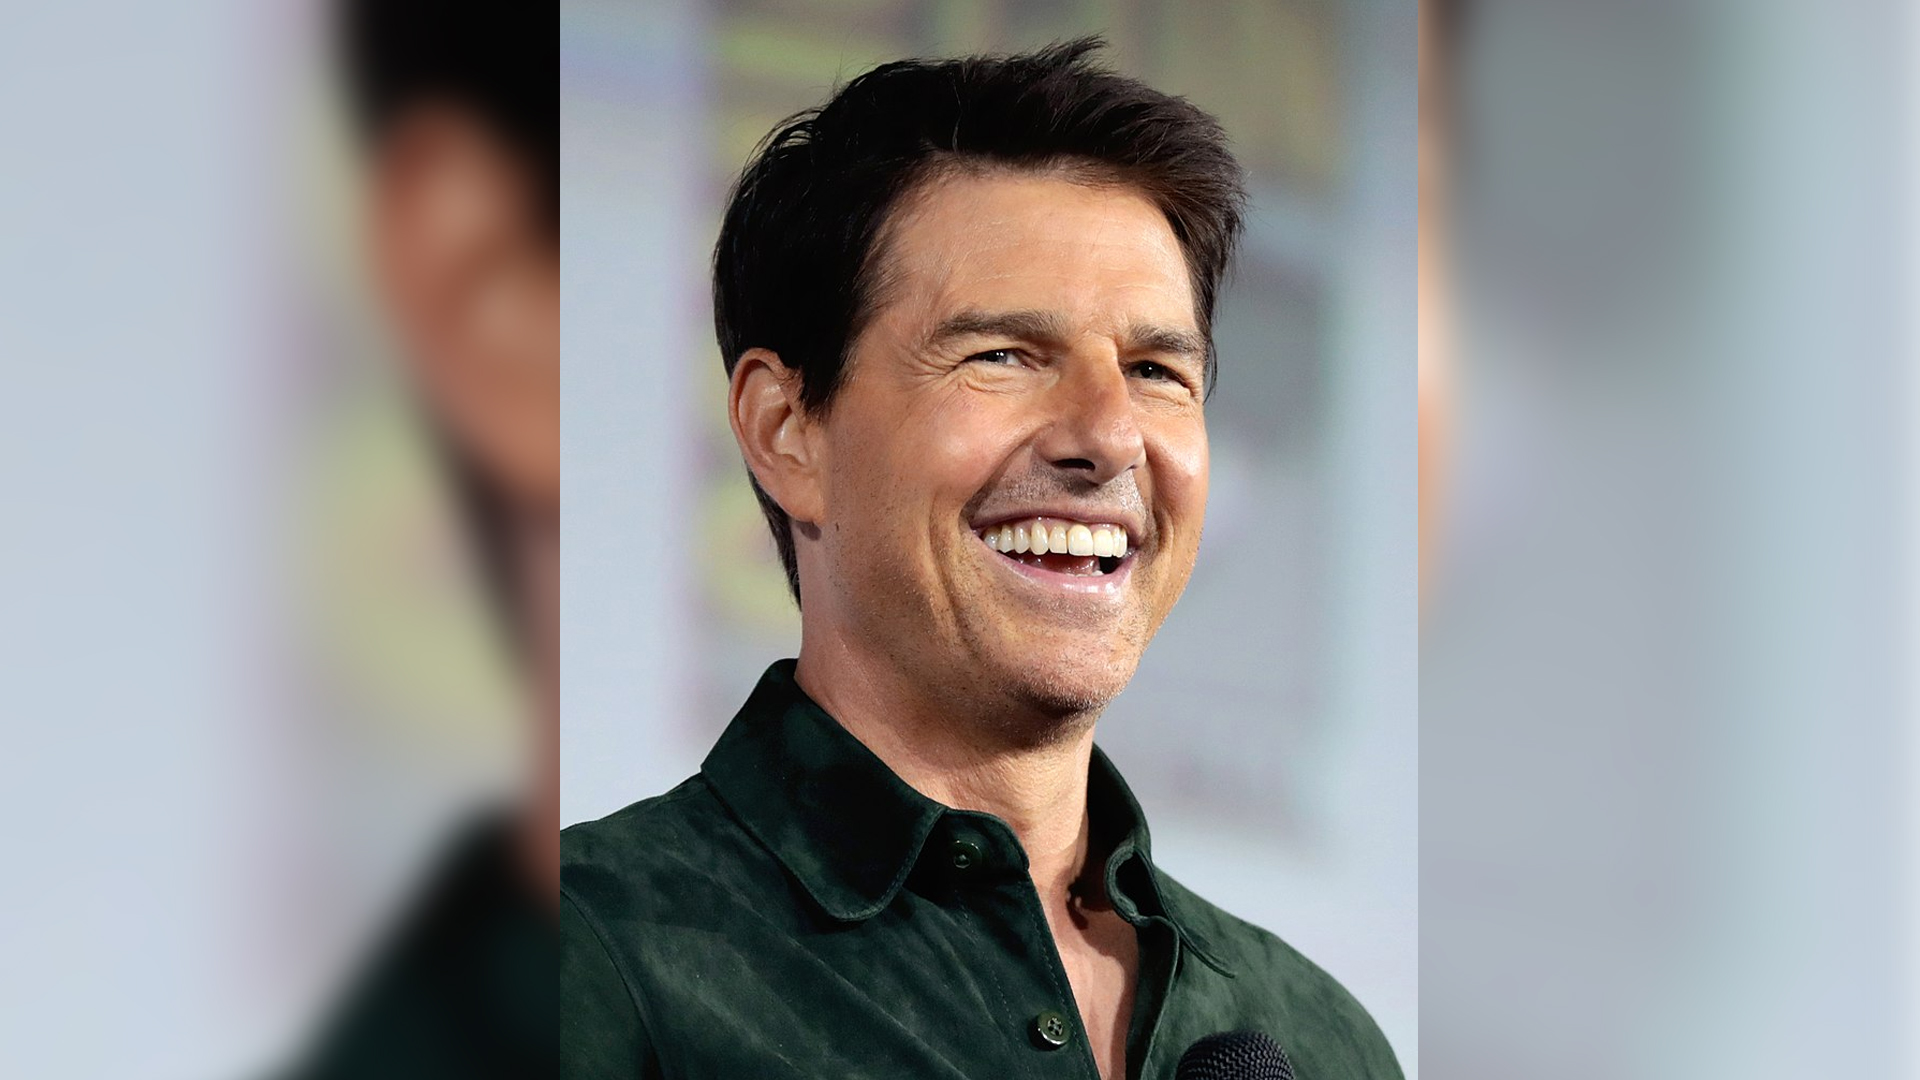 Entertainment News Roundup: Tom Cruise and Warner Bros Discovery